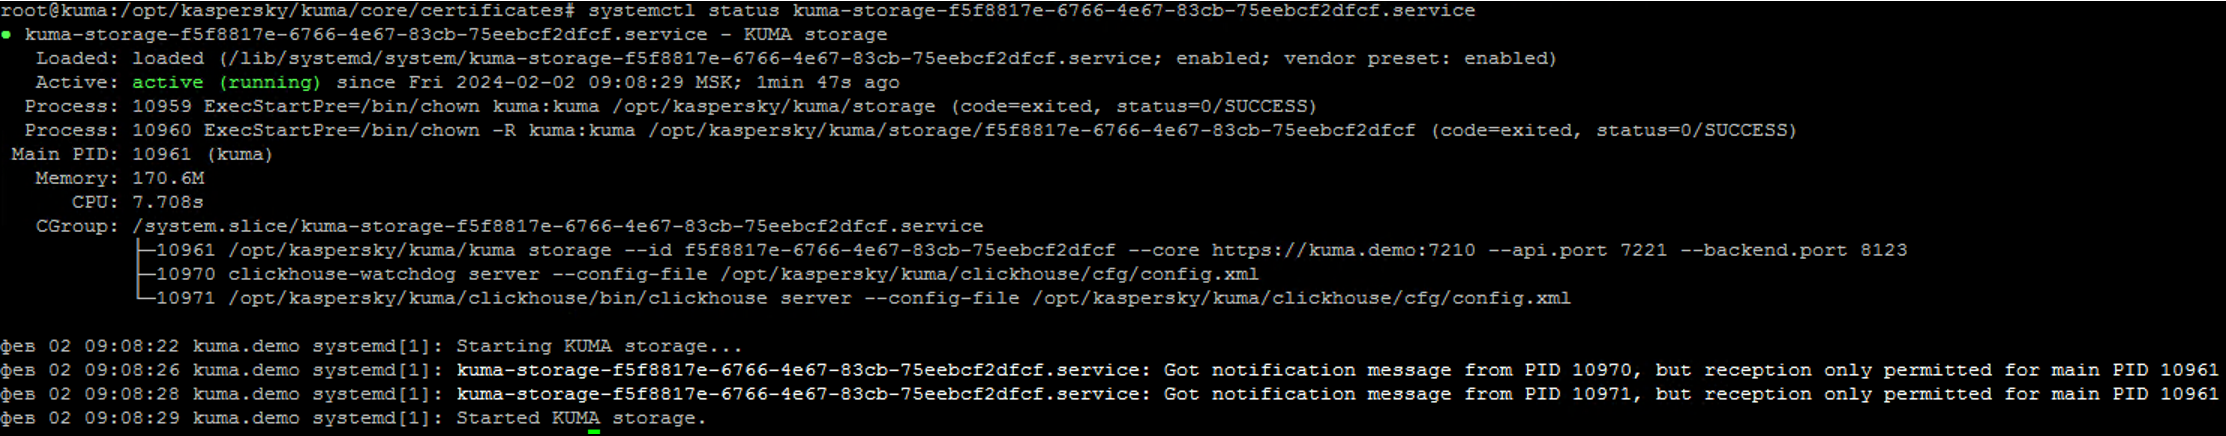 The command execution for checking the service work.